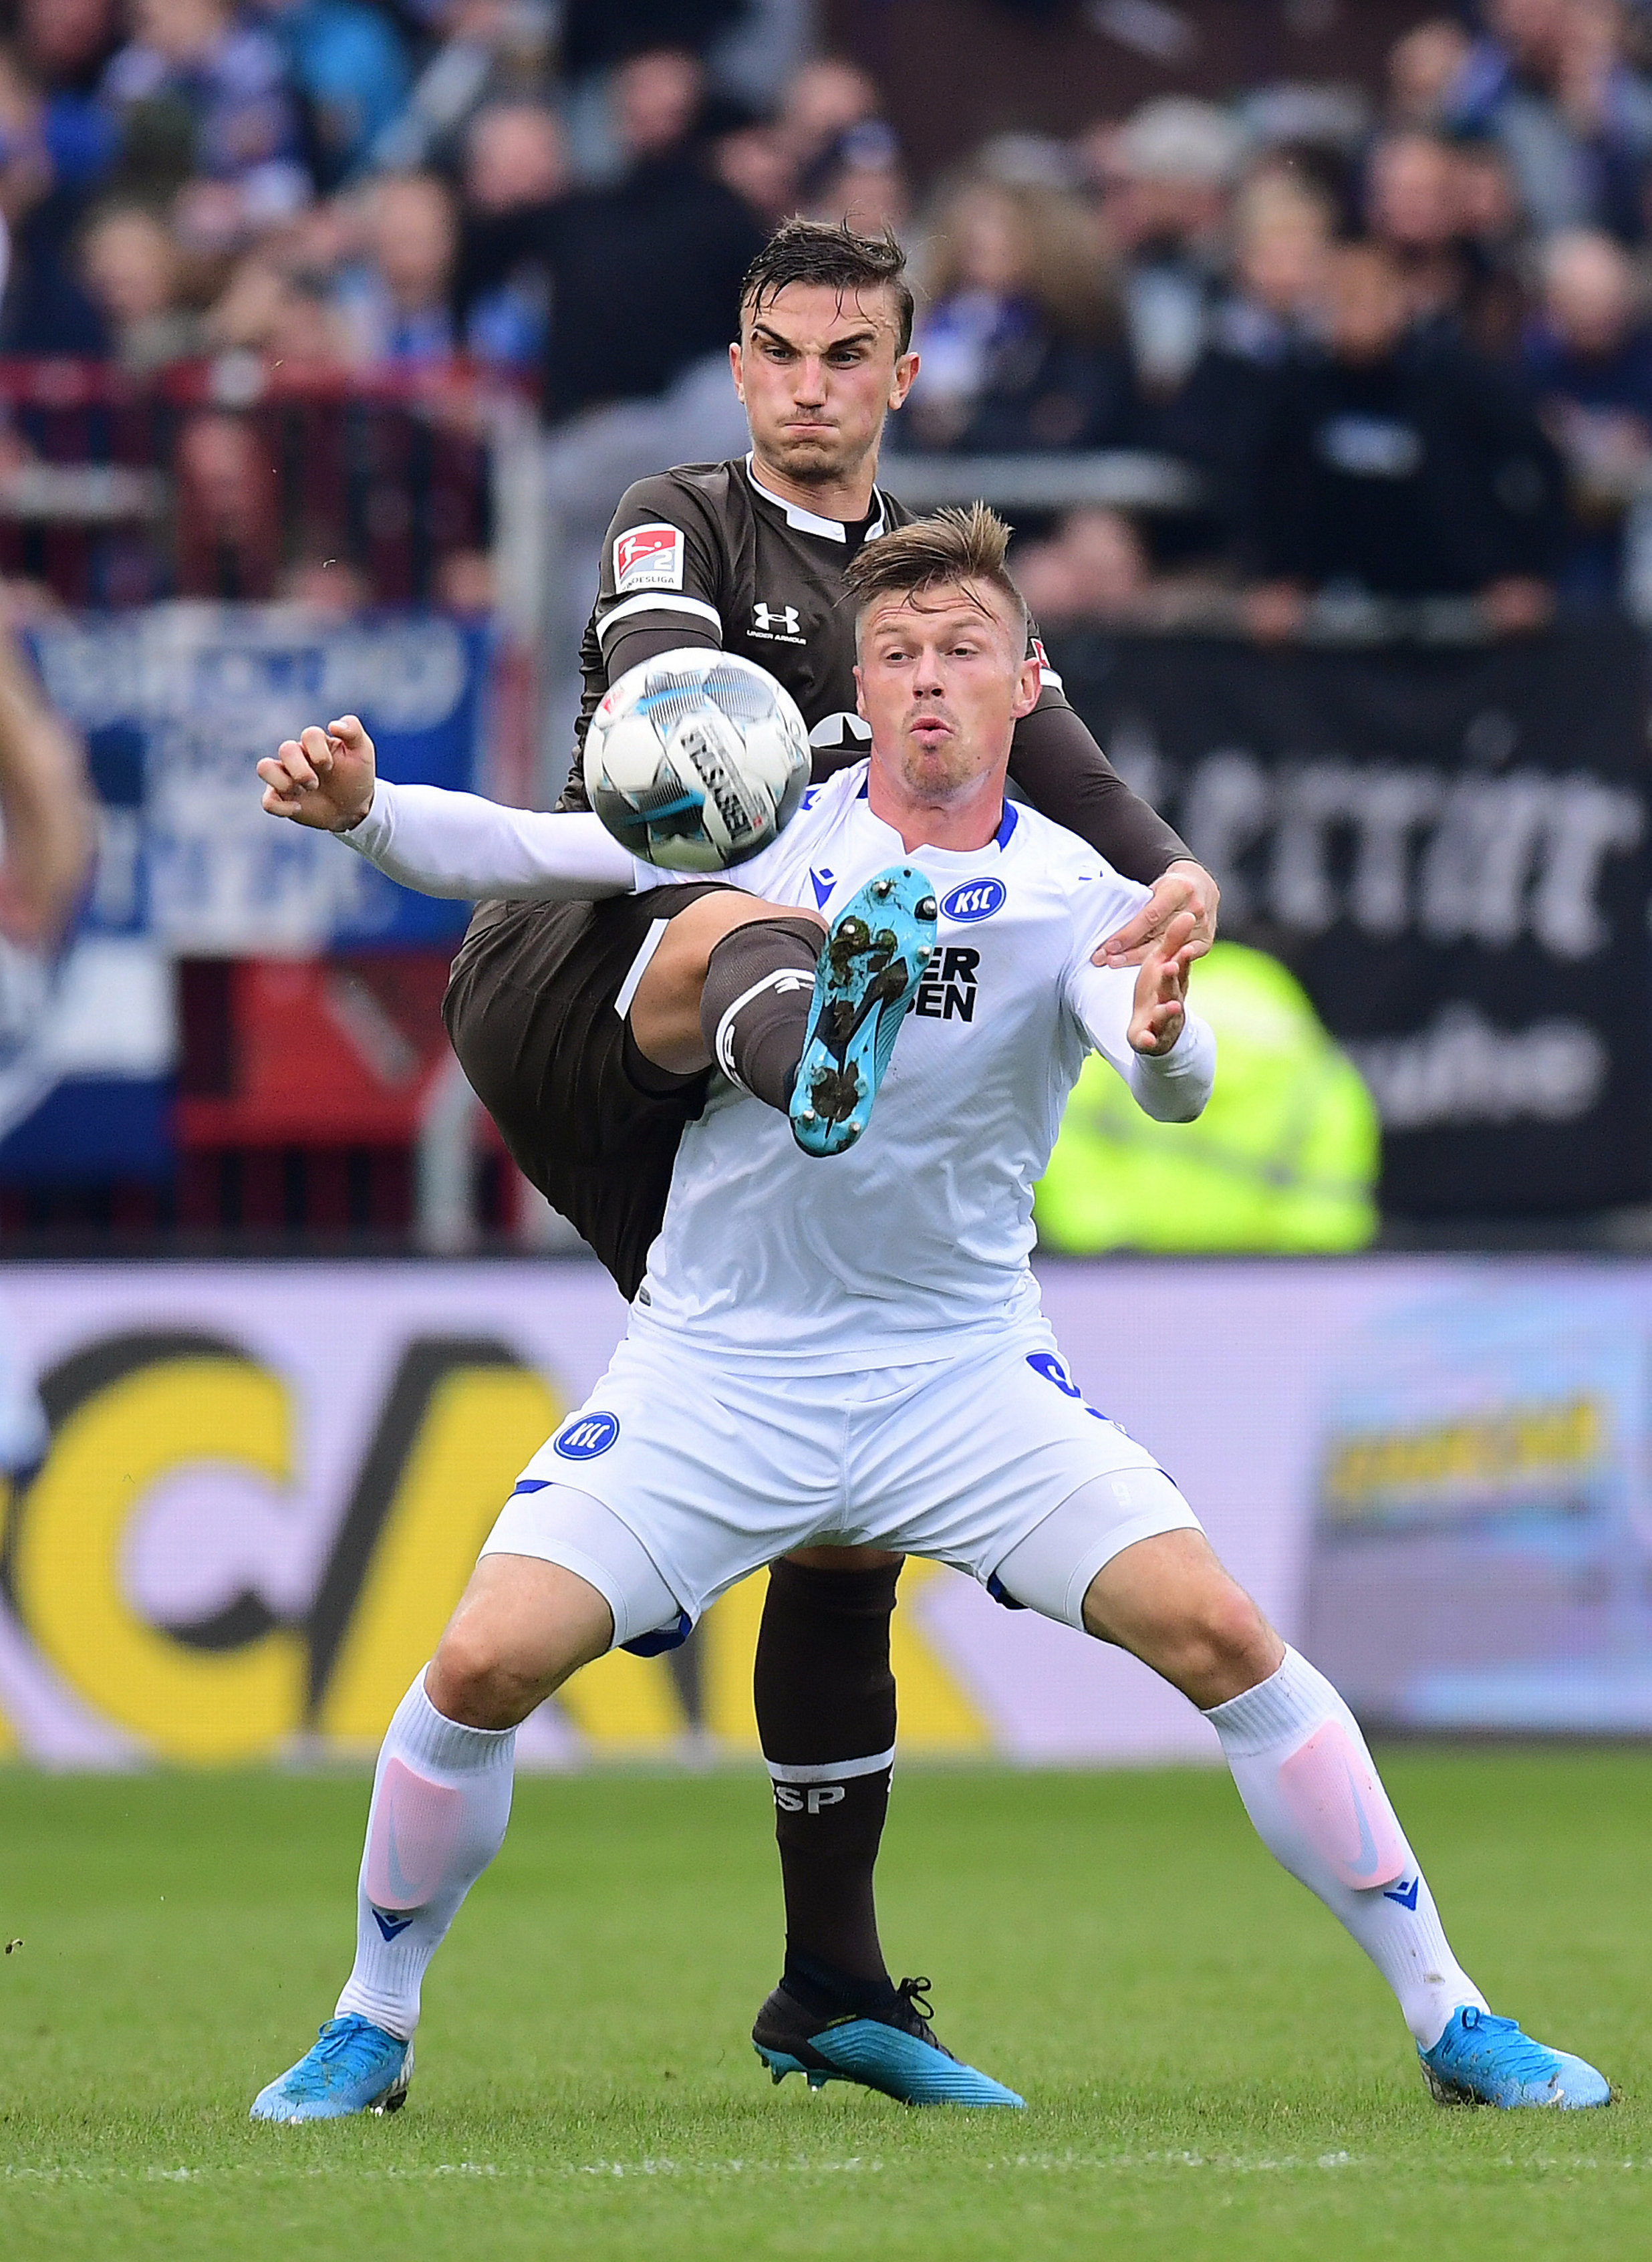 Somewhat unexpectedly, Philipp Ziereis (seen here challenging for the ball with Marvin Pourié) celebrated his return to league action at home against KSC.